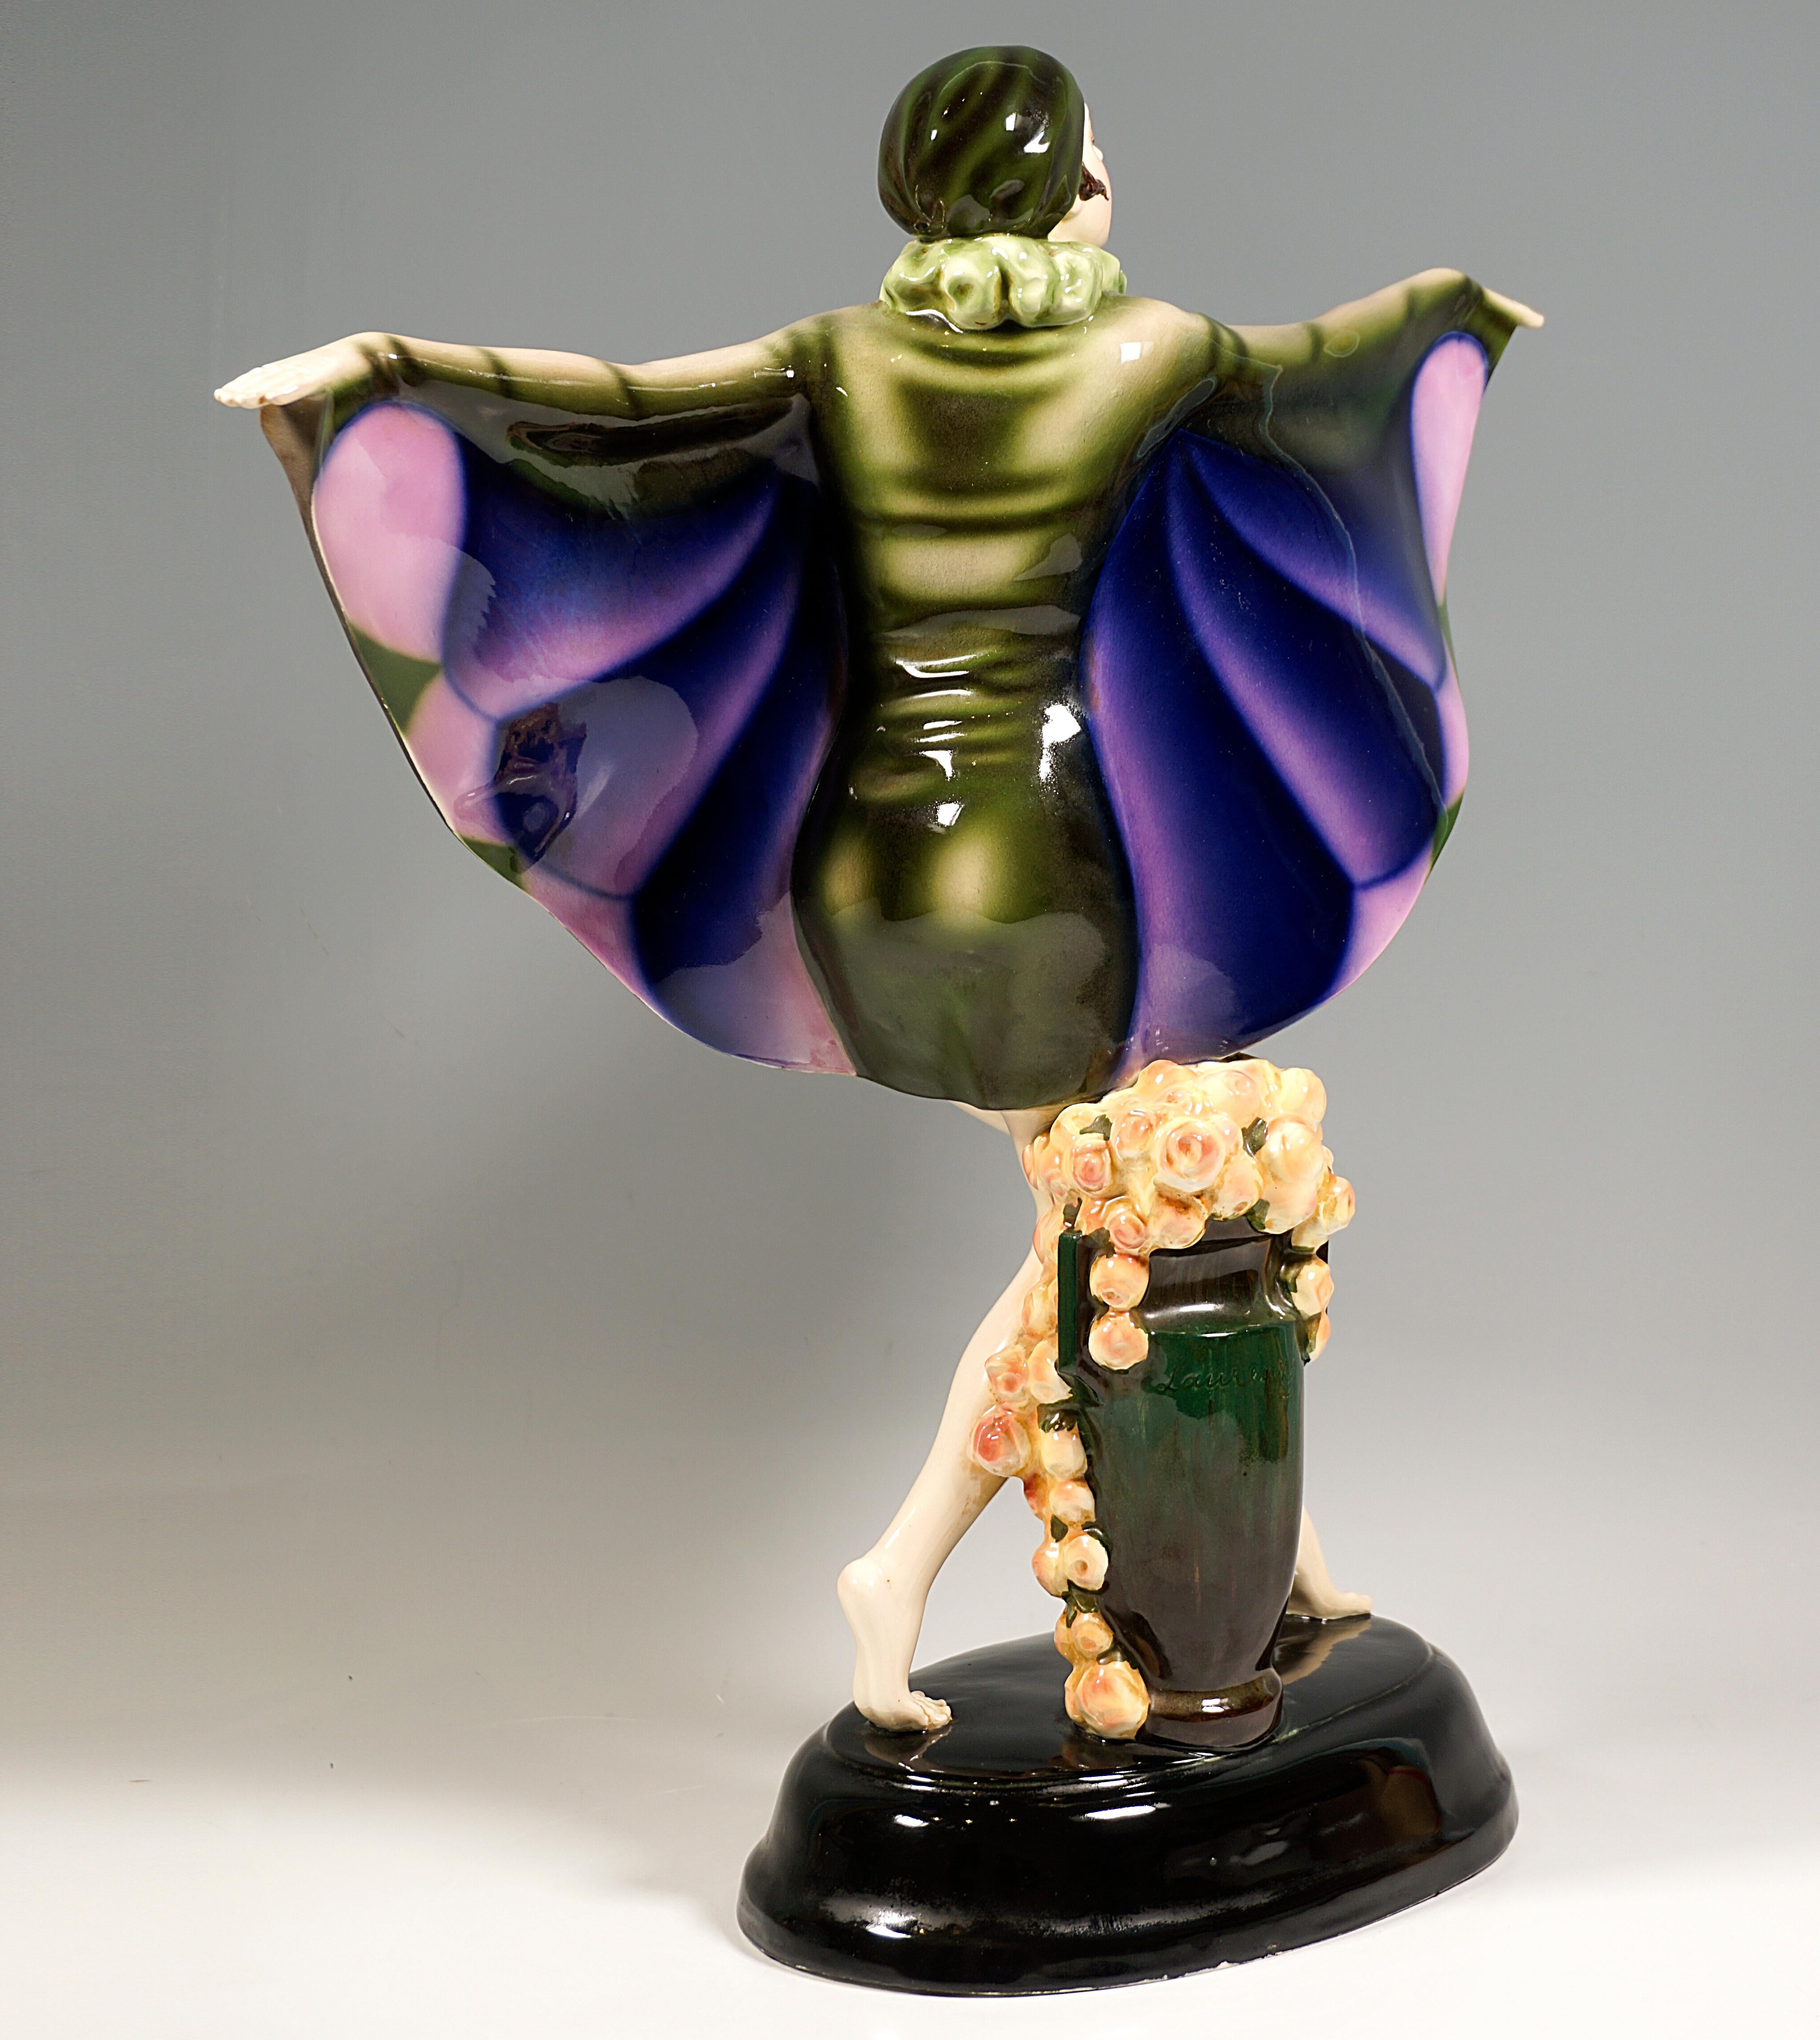 One of the most famous and elegant models from the Goldscheider manufacture:
Depiction of the dance 'The Captured Bird' performed by dancer Niddy Impekoven (1904-2002) in the early 1920s: dancer balancing on tiptoe with arms raised back and forth